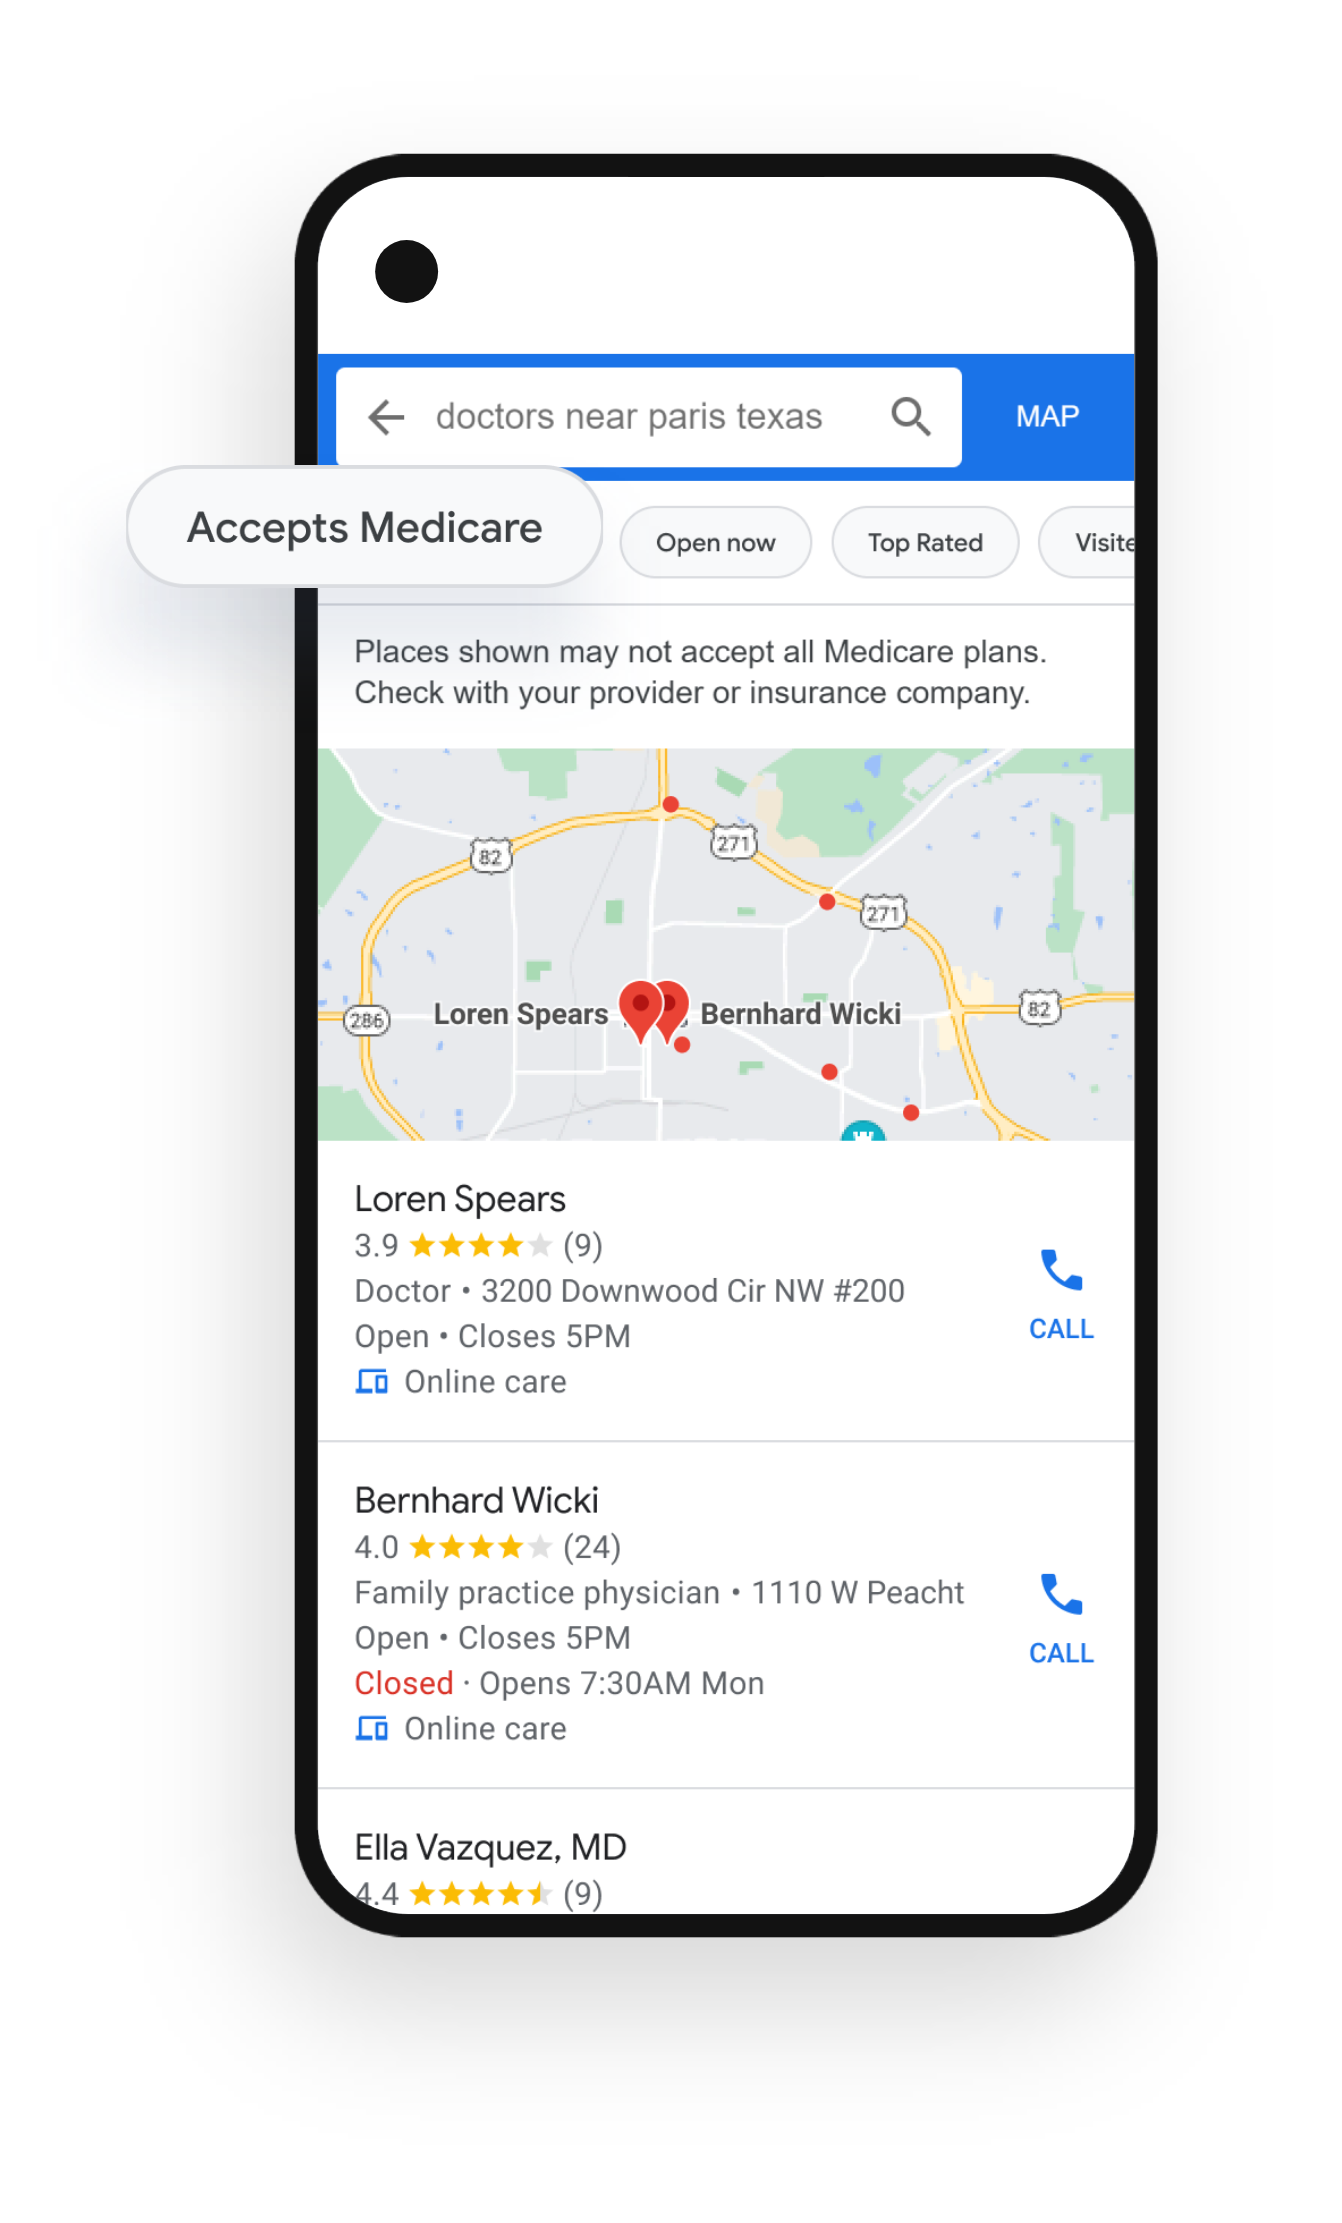 A screenshot showing a Google search for a doctor, with the ability to filter by "Accepts Medicare."